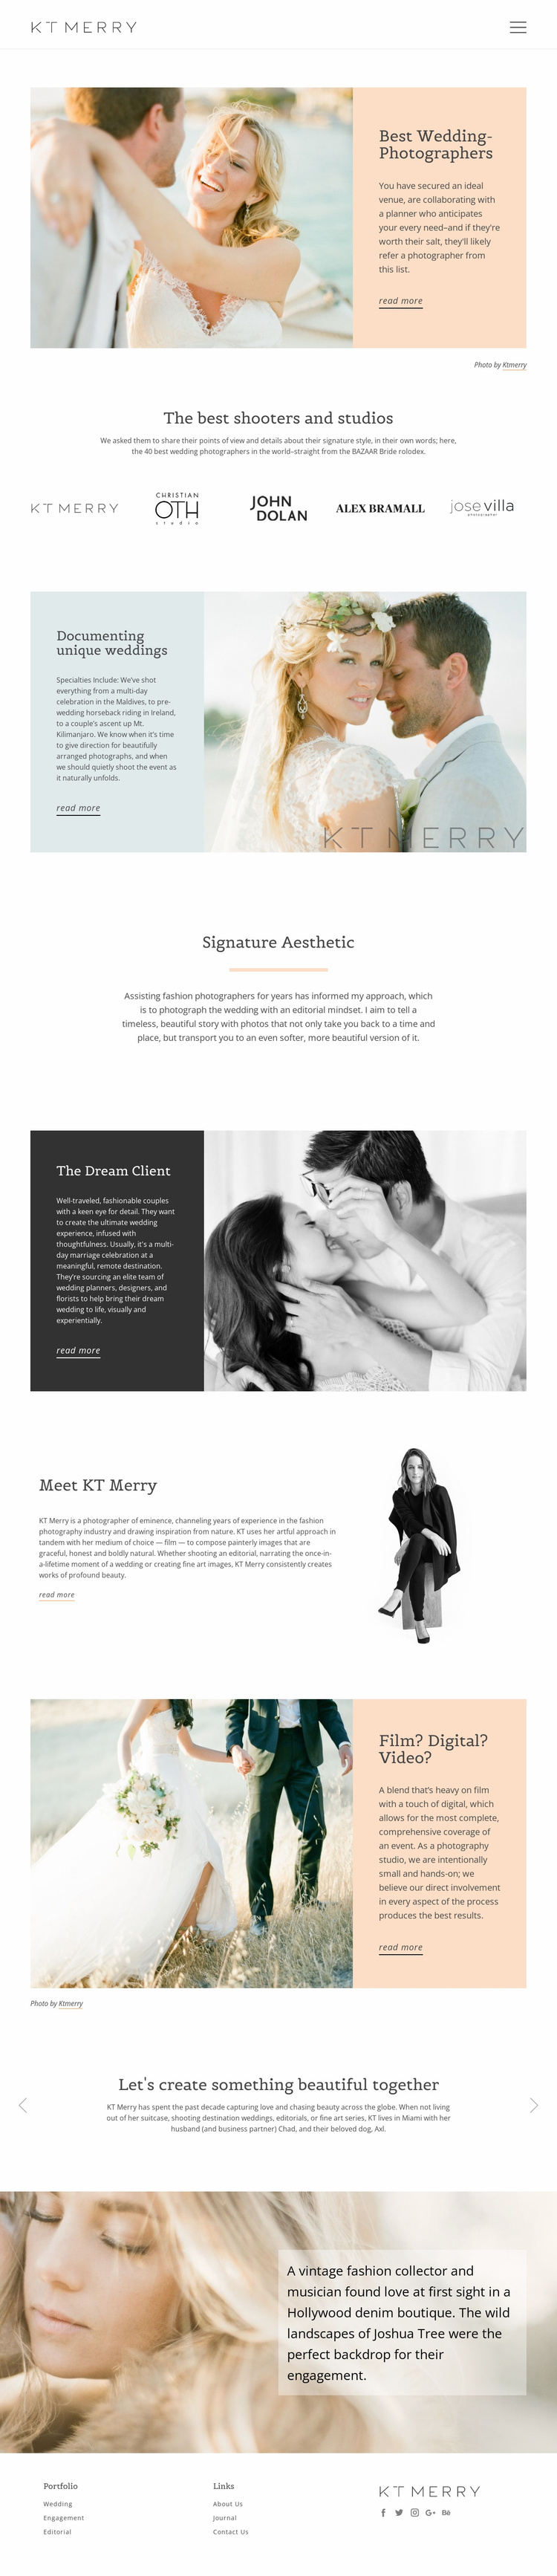 Shooters for special wedding Website Template